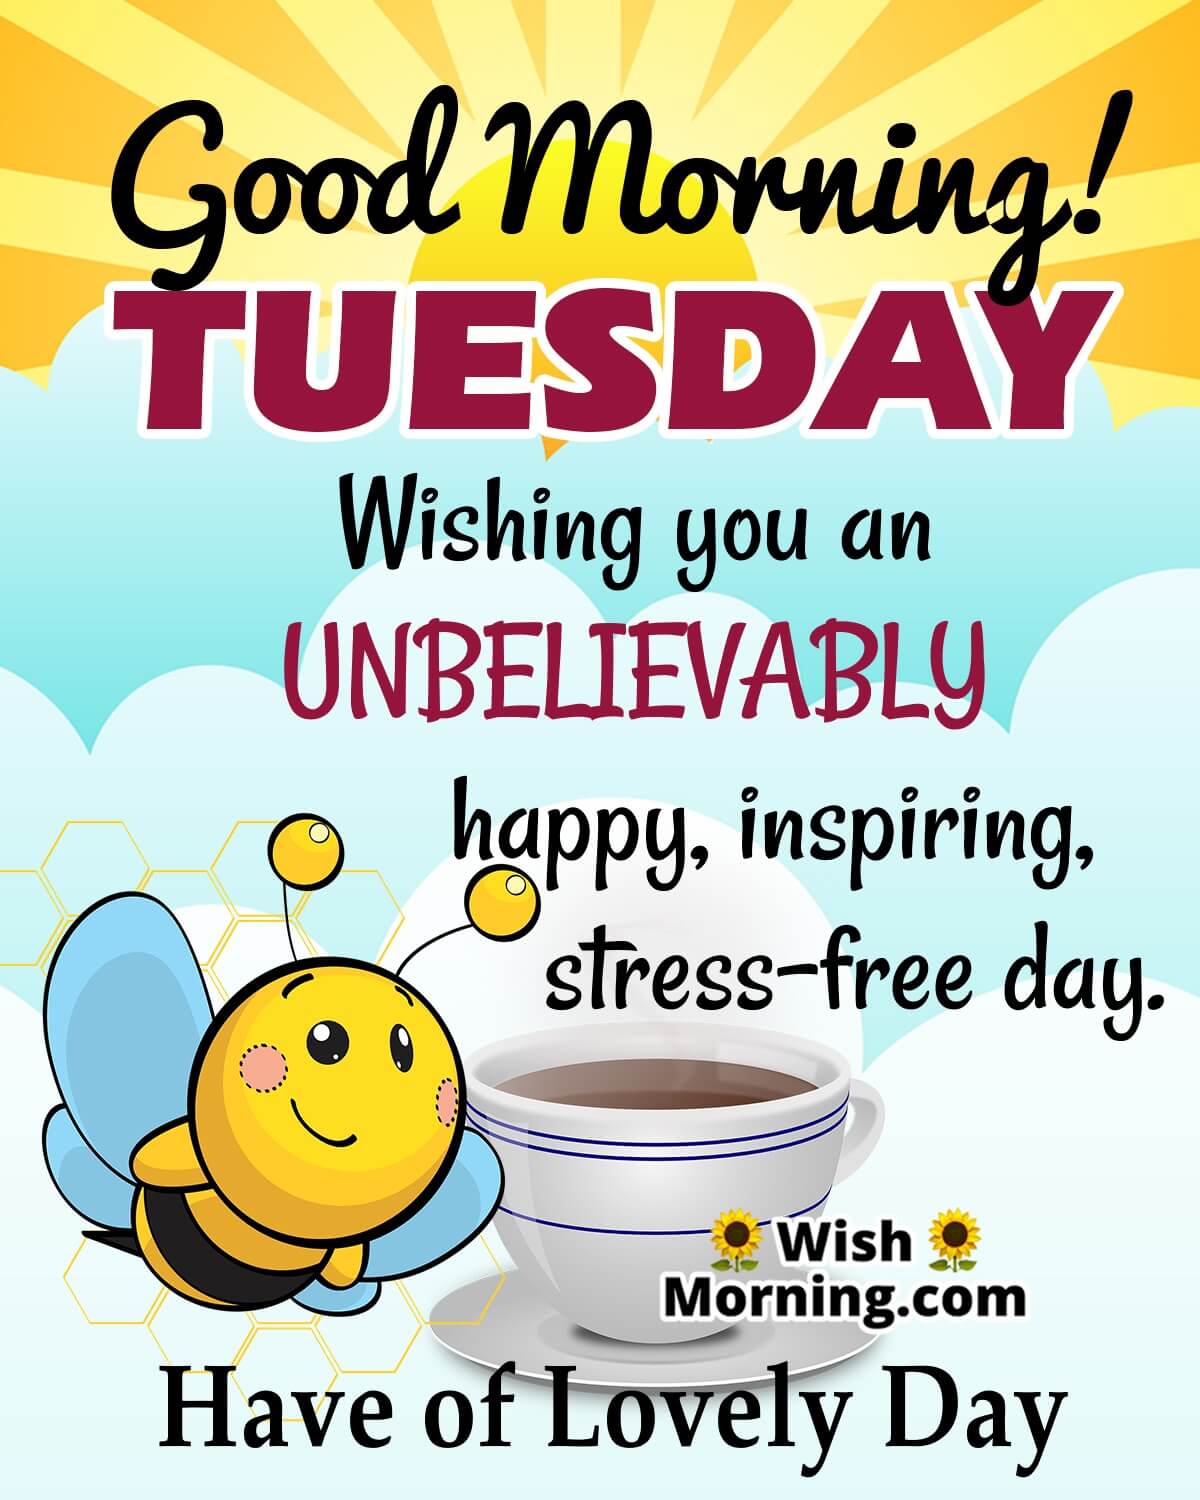 Tuesday Blessings Images - Wish Morning